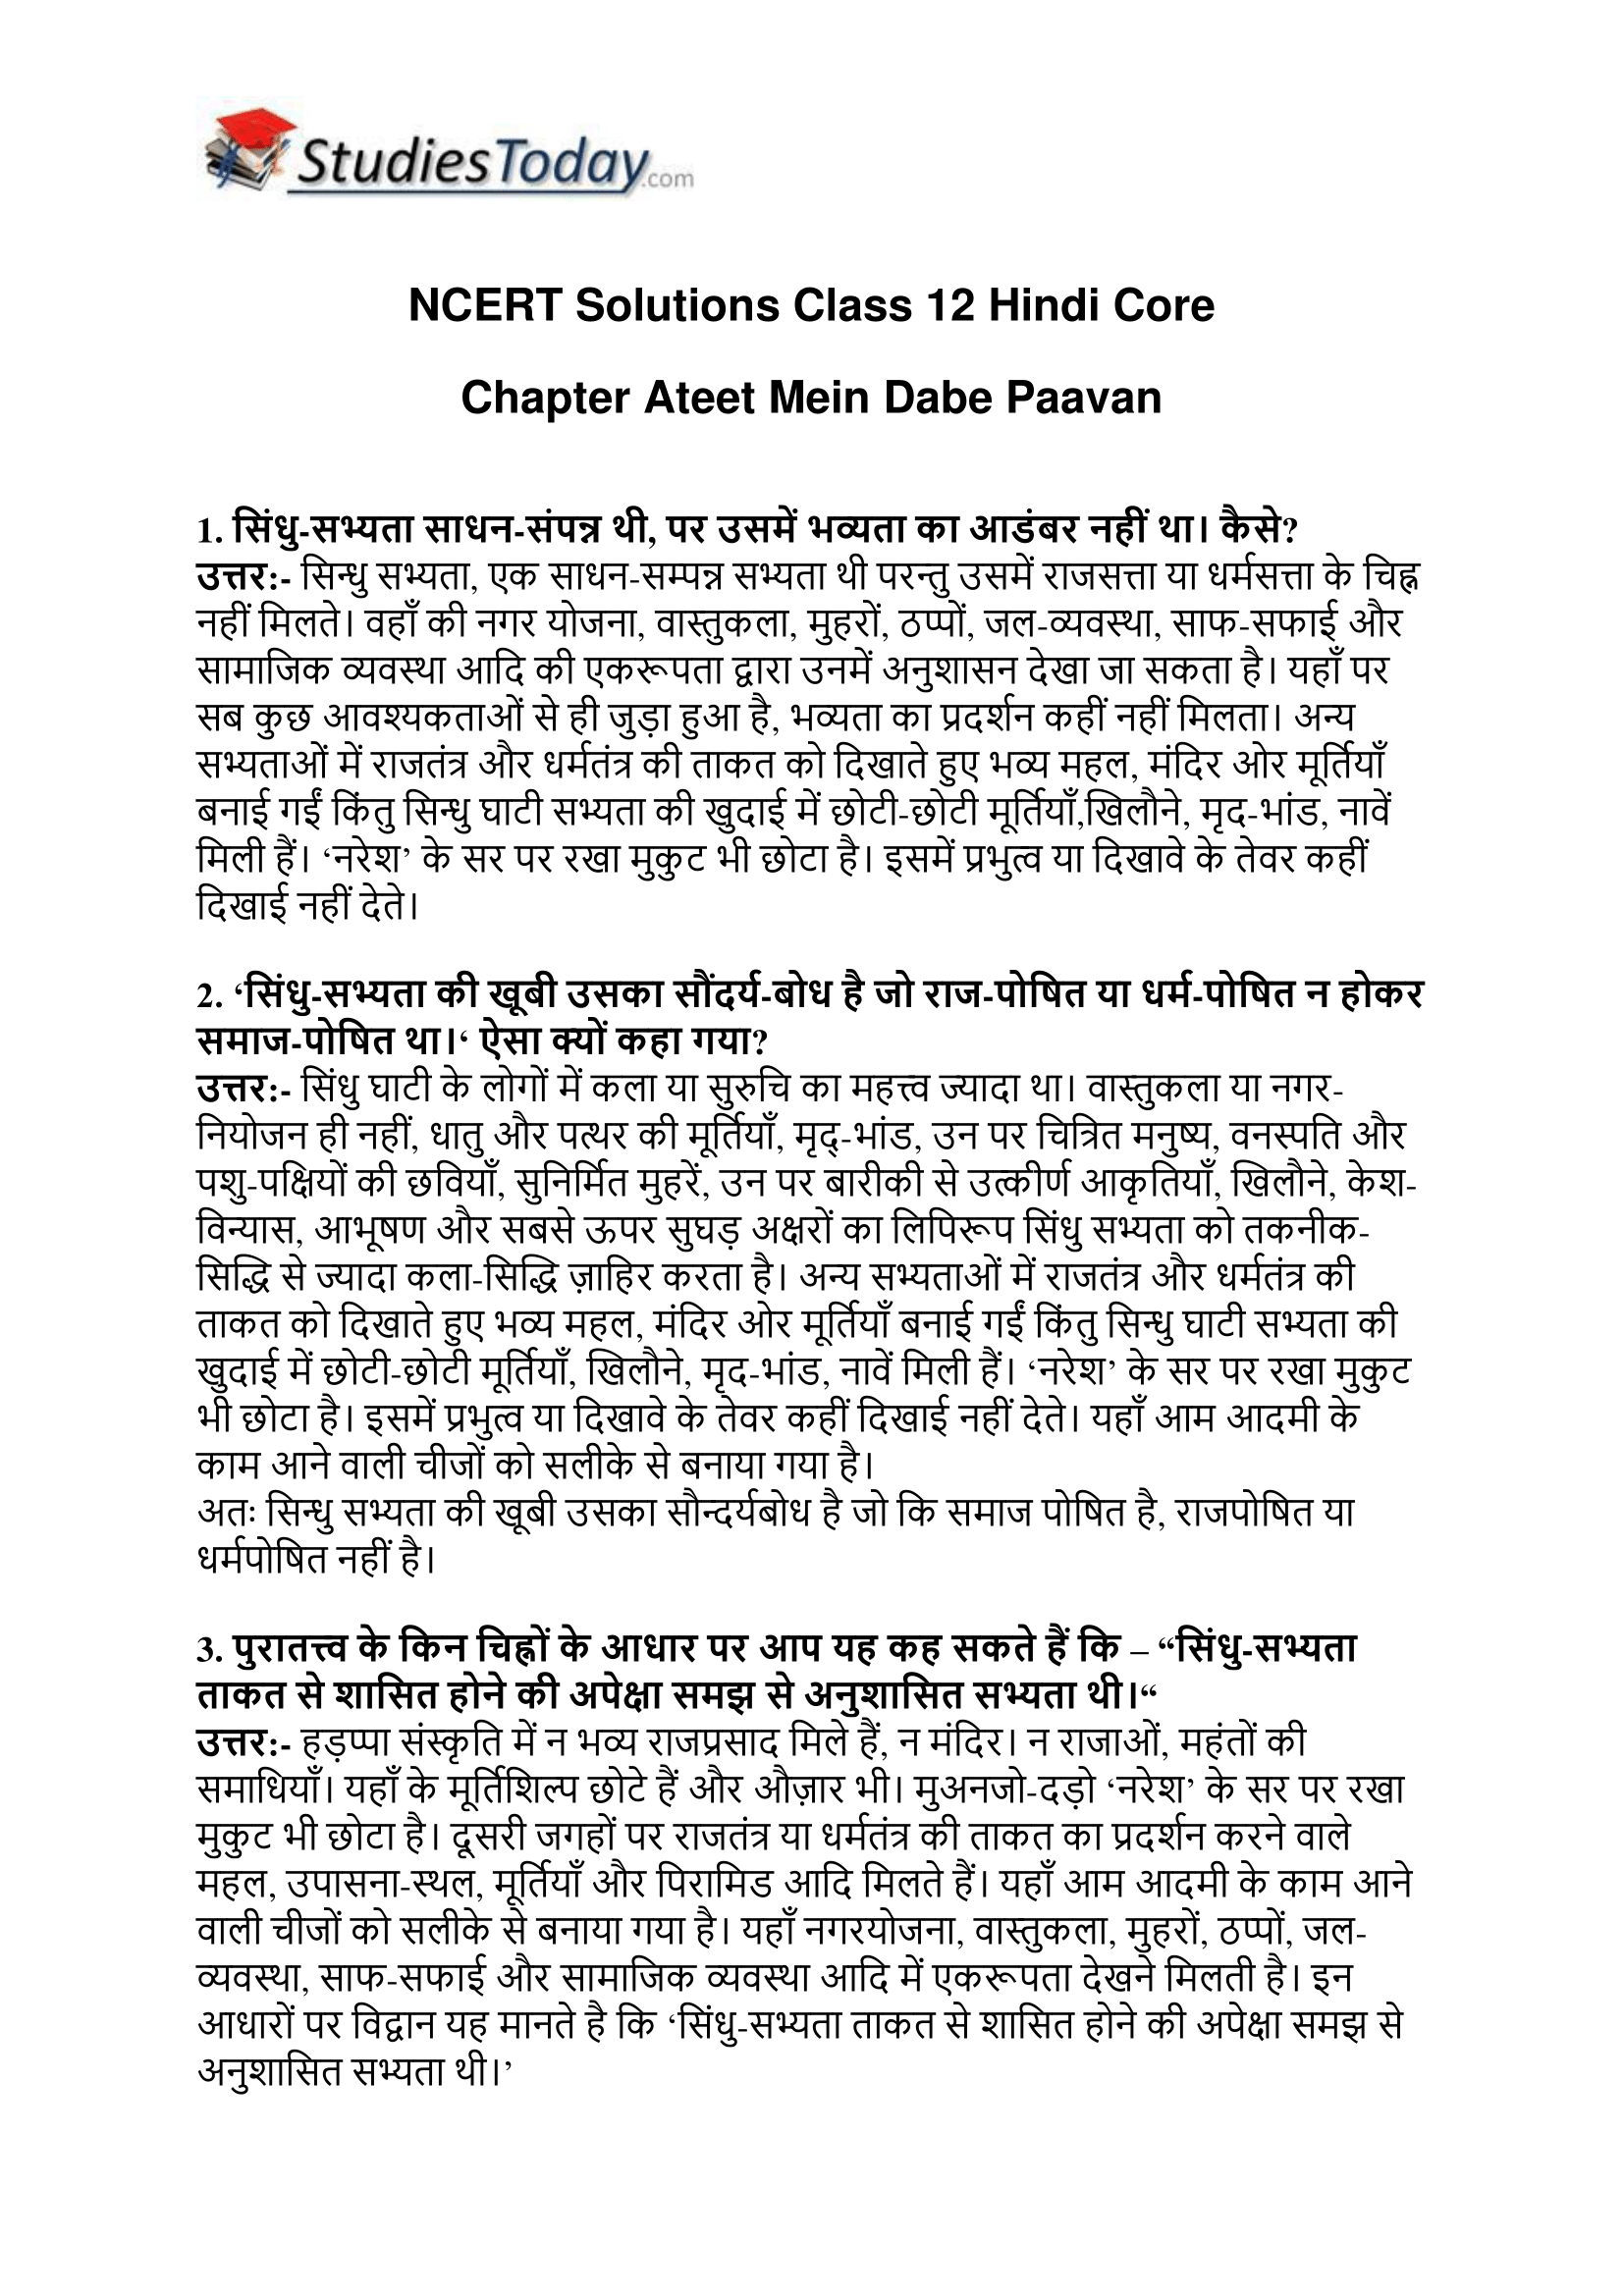 ncert-solutions-class-12-hindi-core-chapter-ateet-mein-dabe-paavan-1